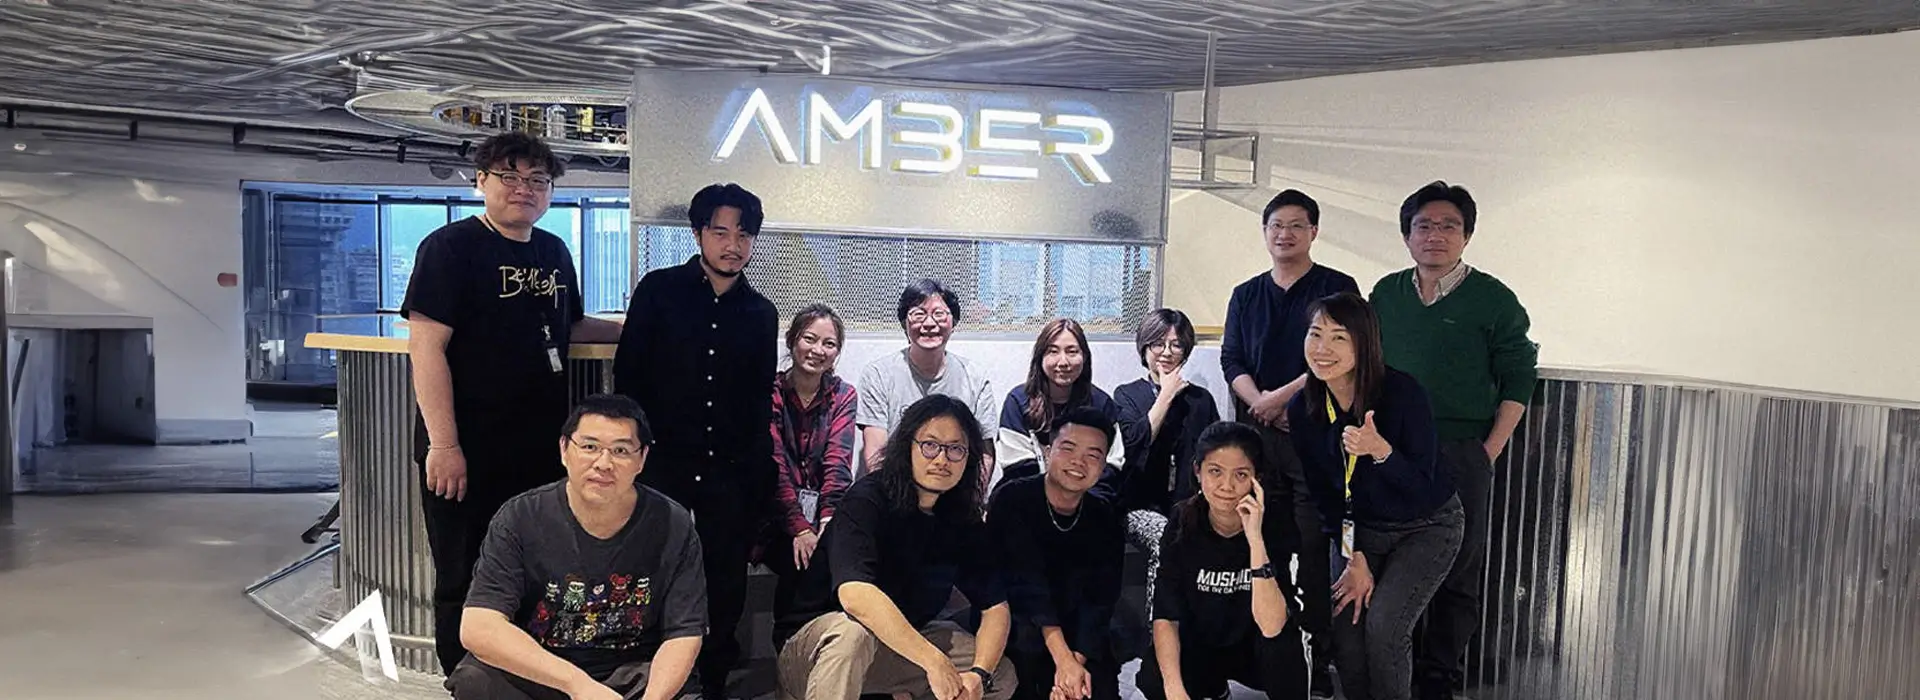 Amber expands with two new studios in Asia: the Philippines and Taiwan